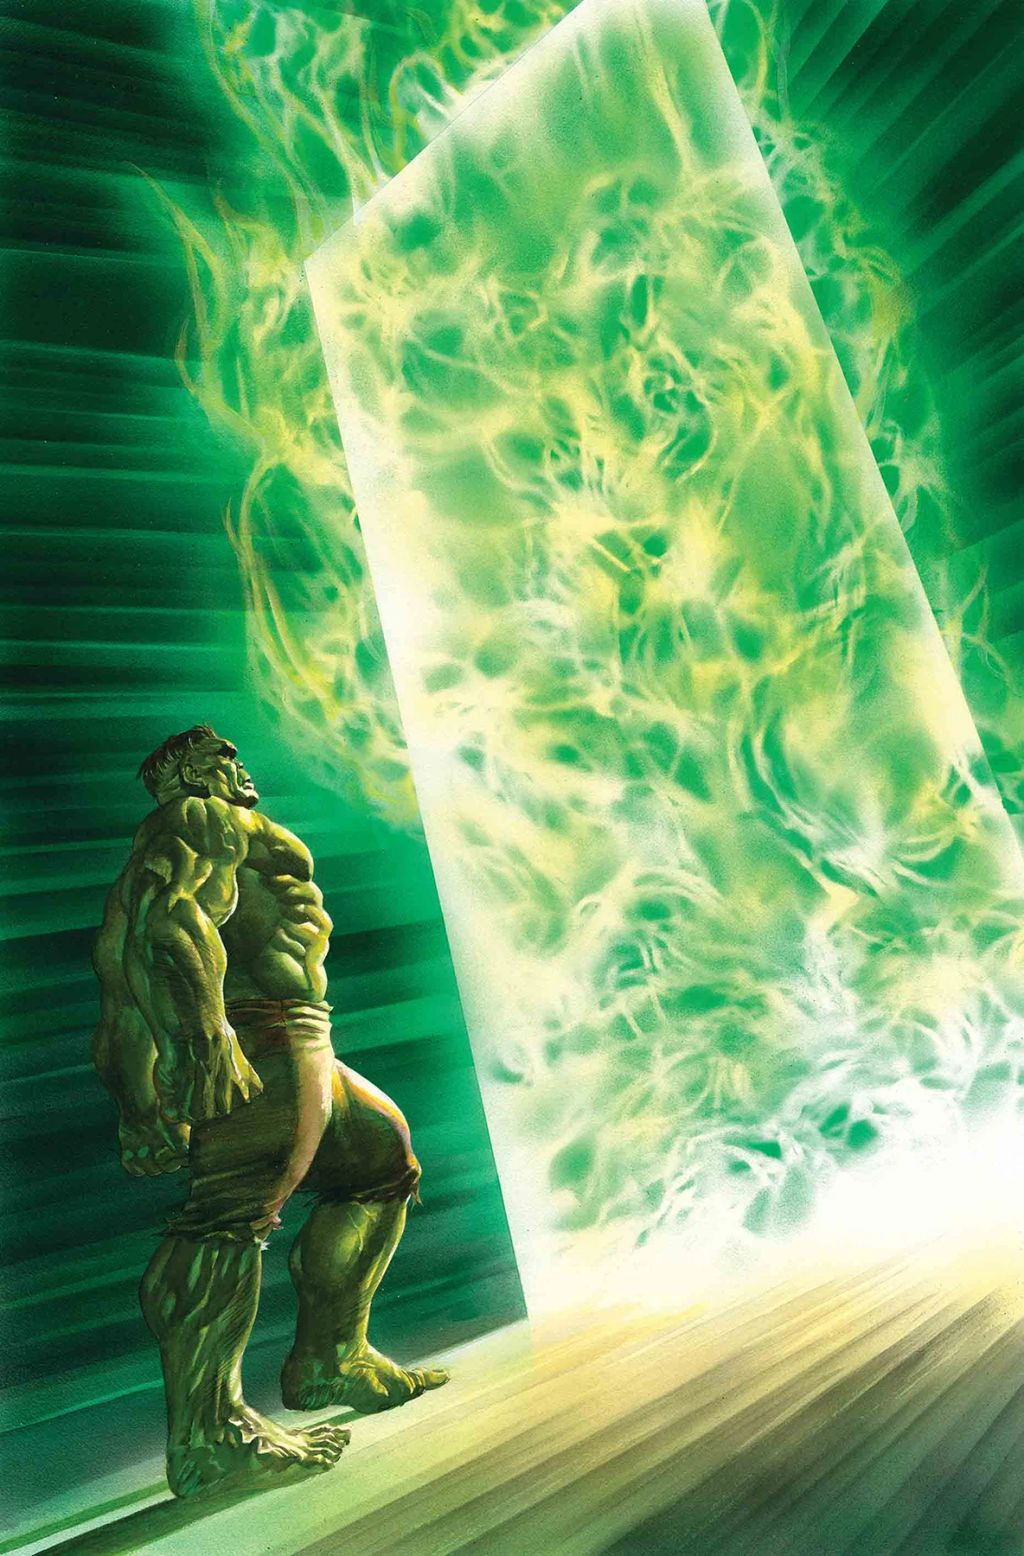 The Hulk comes face-to-face with The Green Door on Alex Ross' cover to Immortal Hulk Vol. 1 #10 "Thaumiel" (2018), Marvel Comics